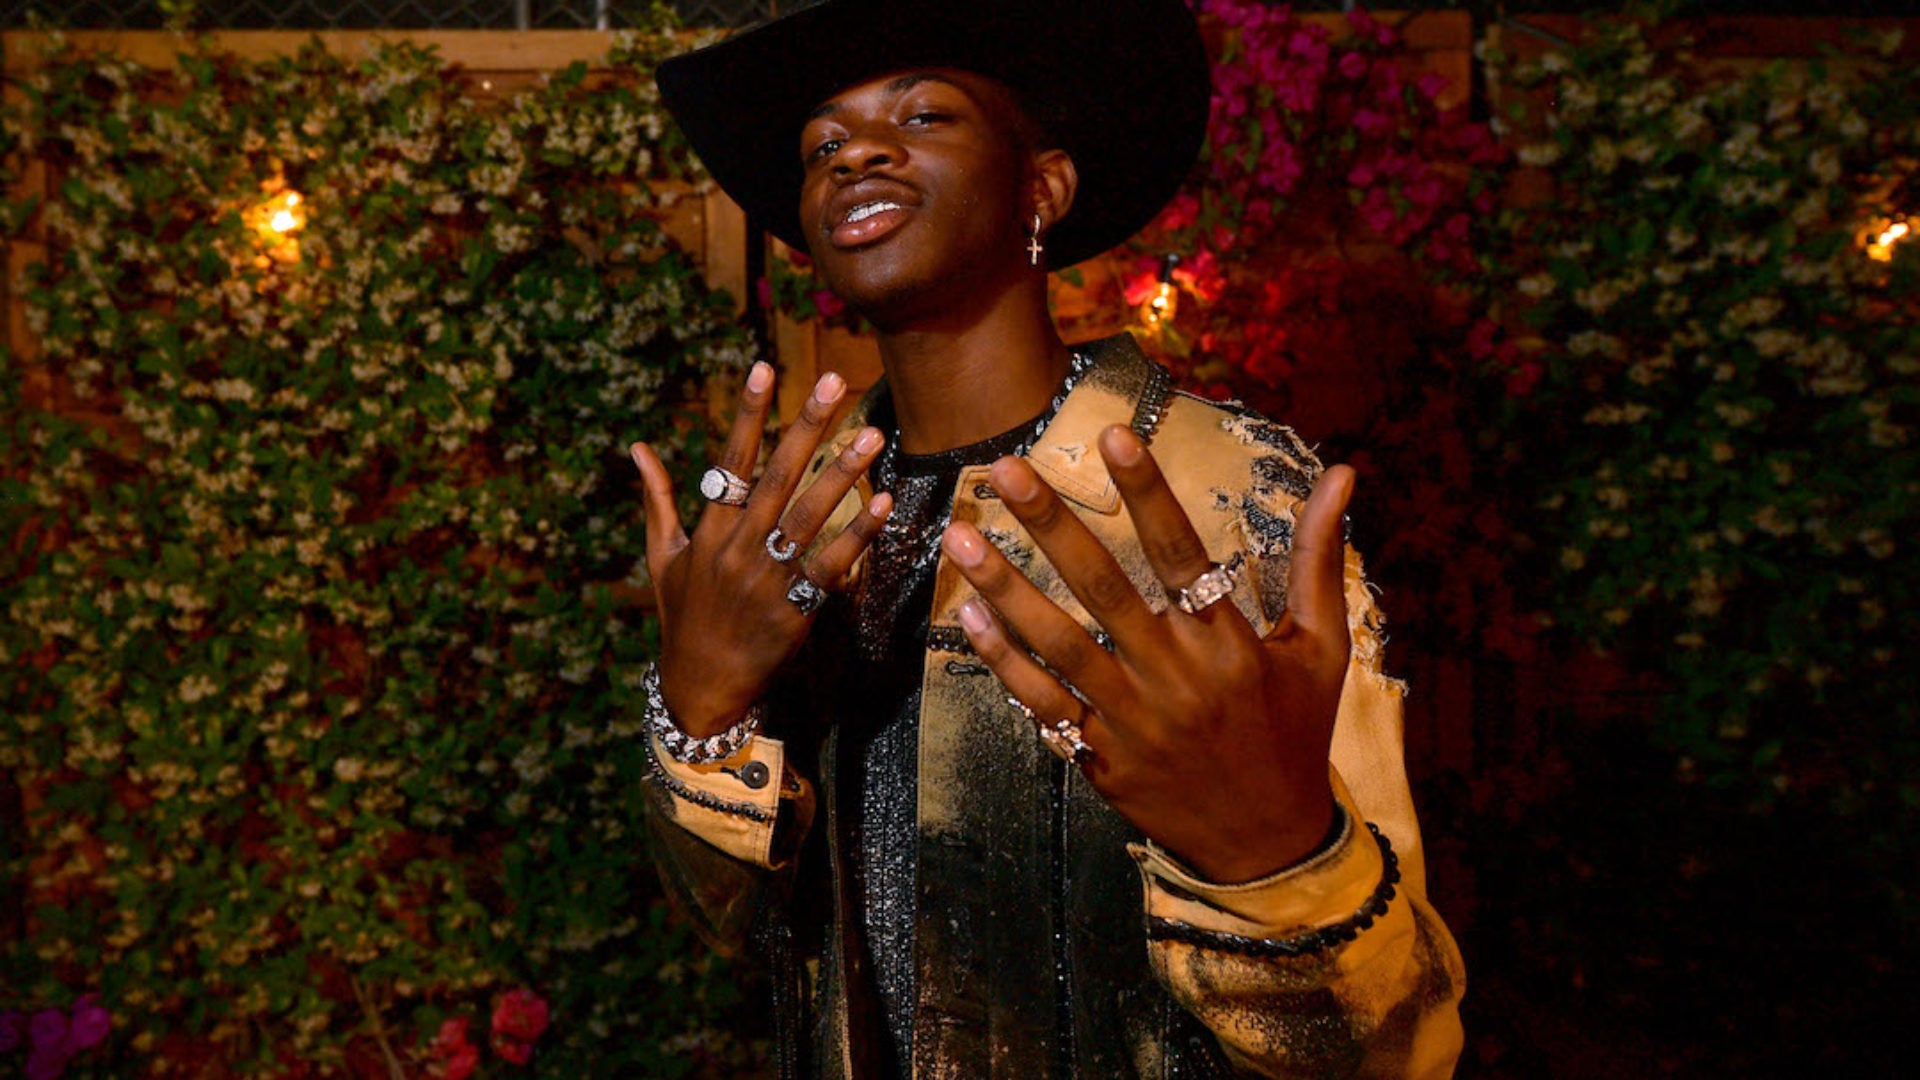 Lil Nas Xs Old Town Road Breaks Billboard Record With 17 Weeks At No 1 5309